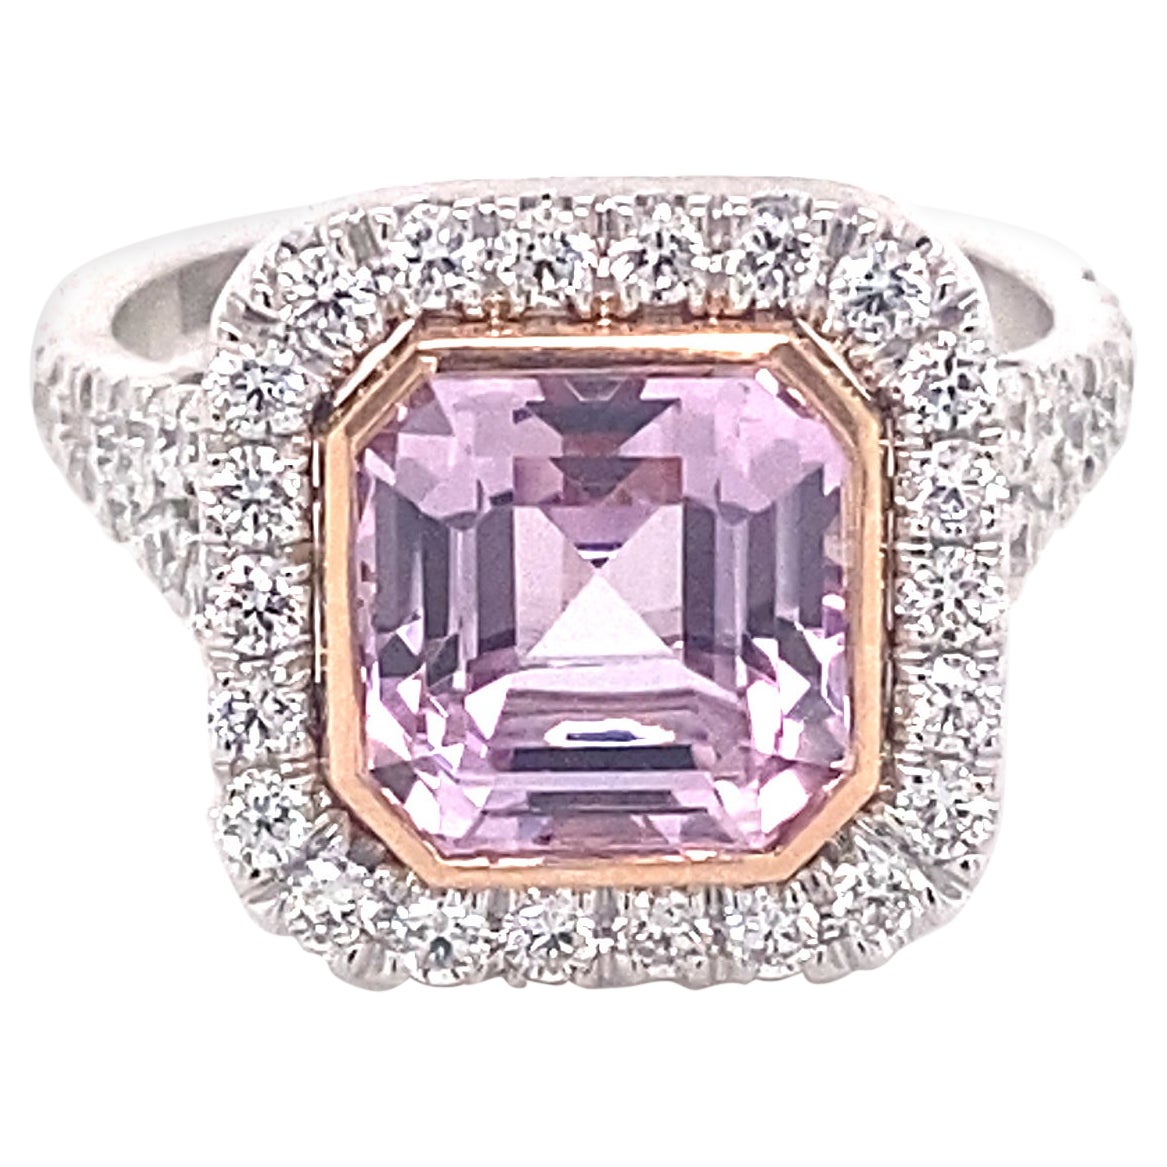 4.14ct Natural Asscher Cut Purple-Pink Sapphire Ring, 14kt White Gold Ring, GIA For Sale